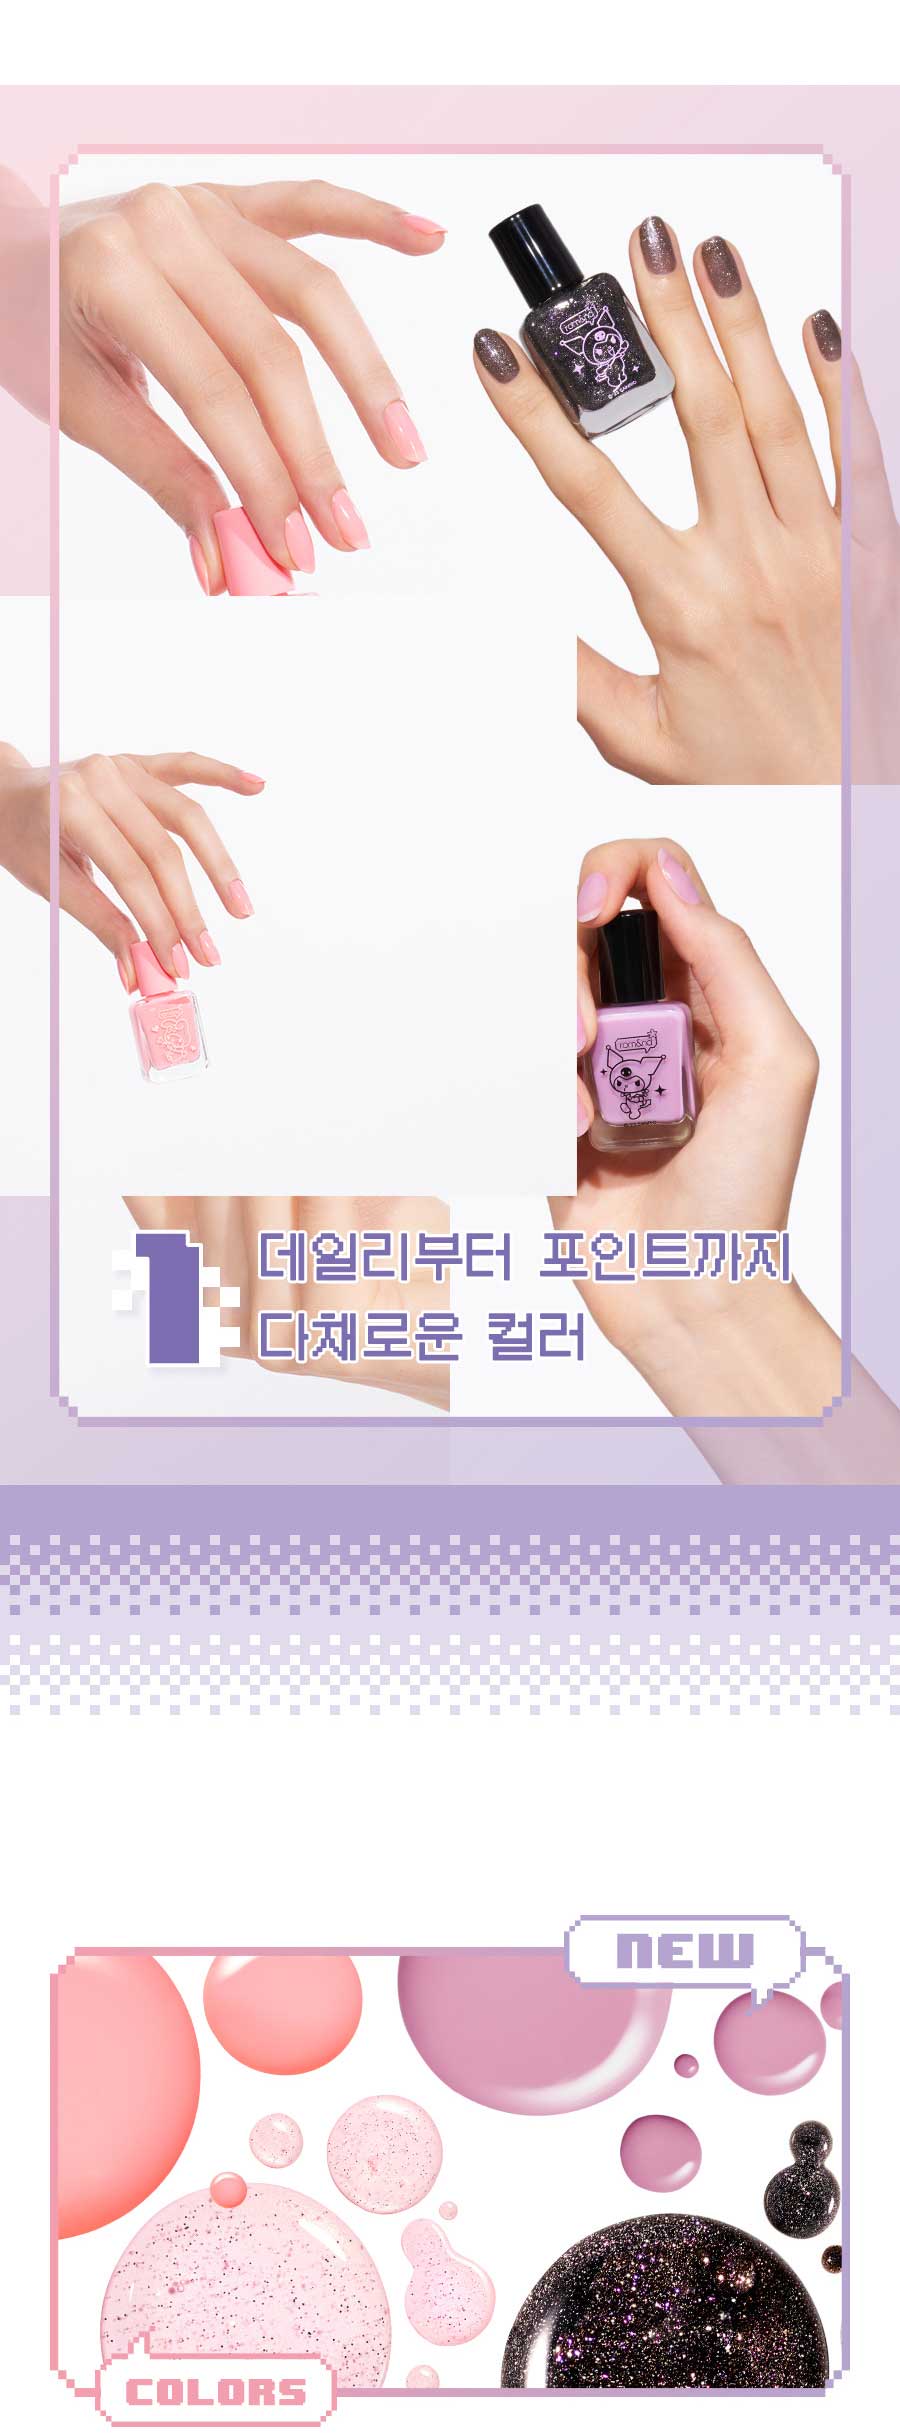 How are Korean Nails